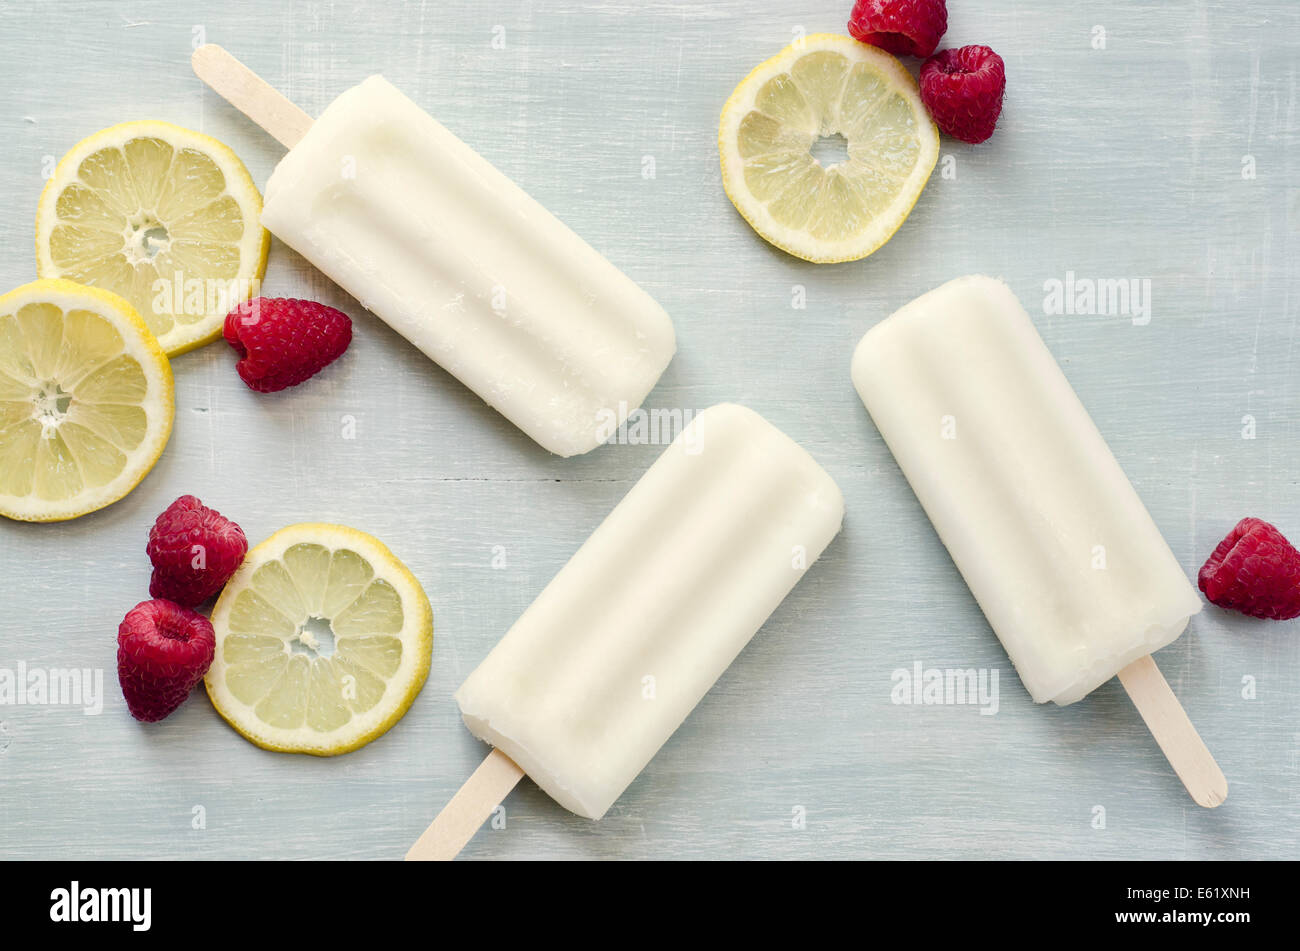 Popsicles ice lolly Stock Photo